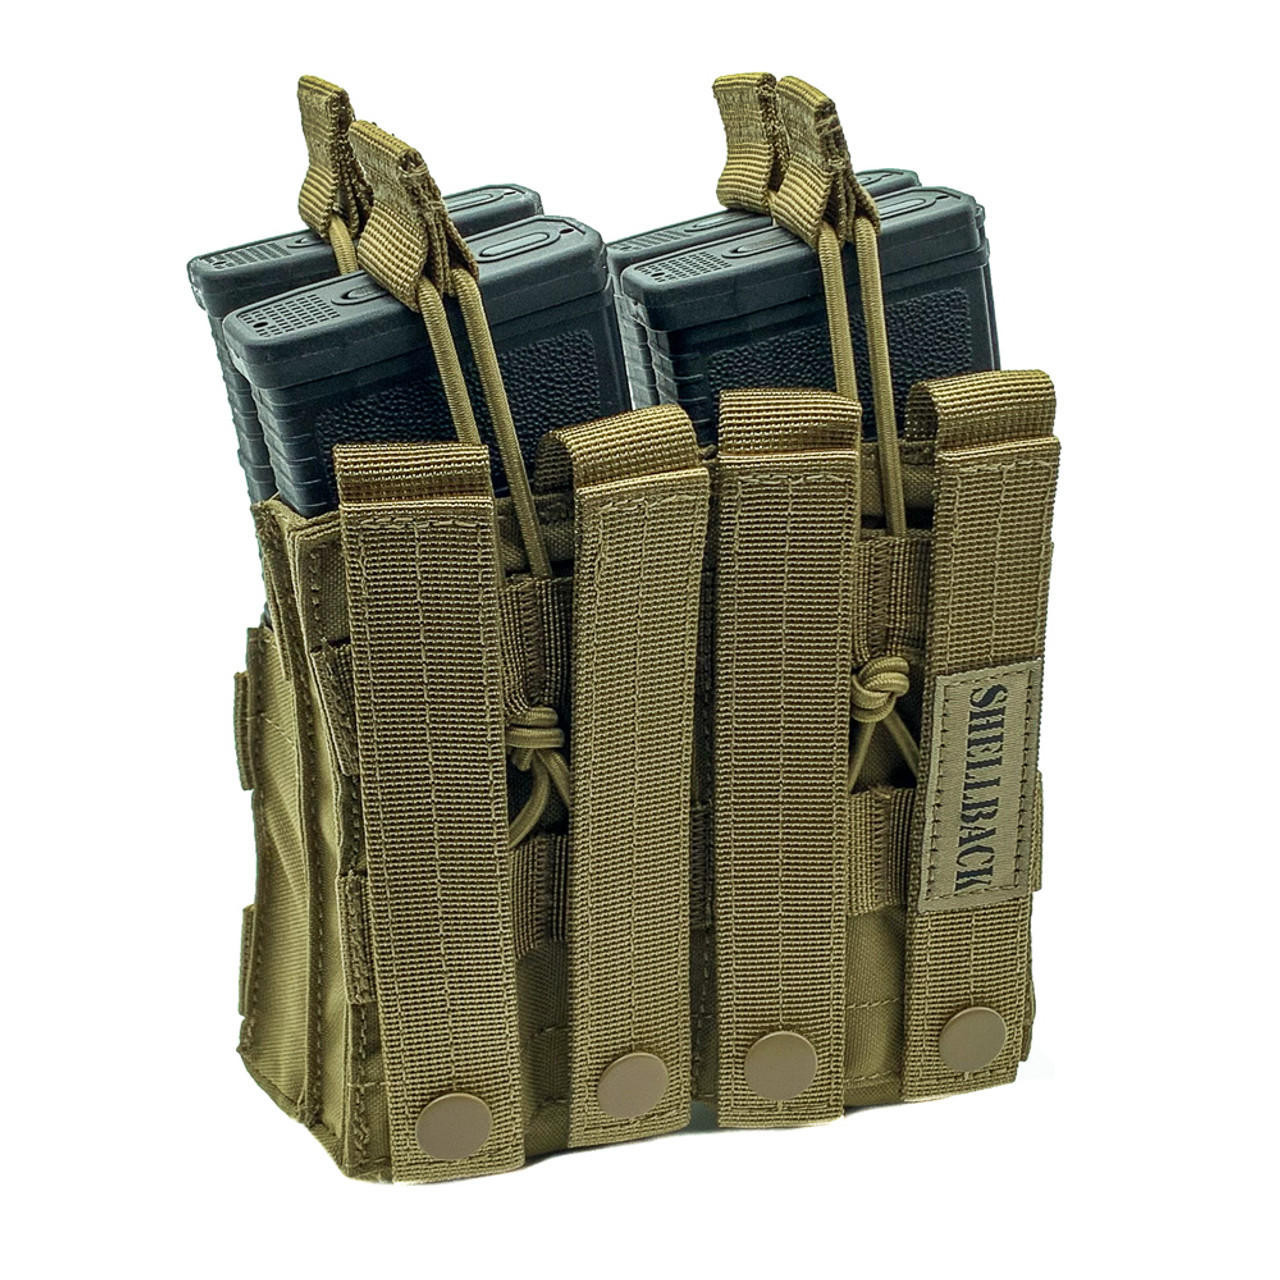  Shellback Tactical Double Stacker Open Top M4 Mag Pouch 